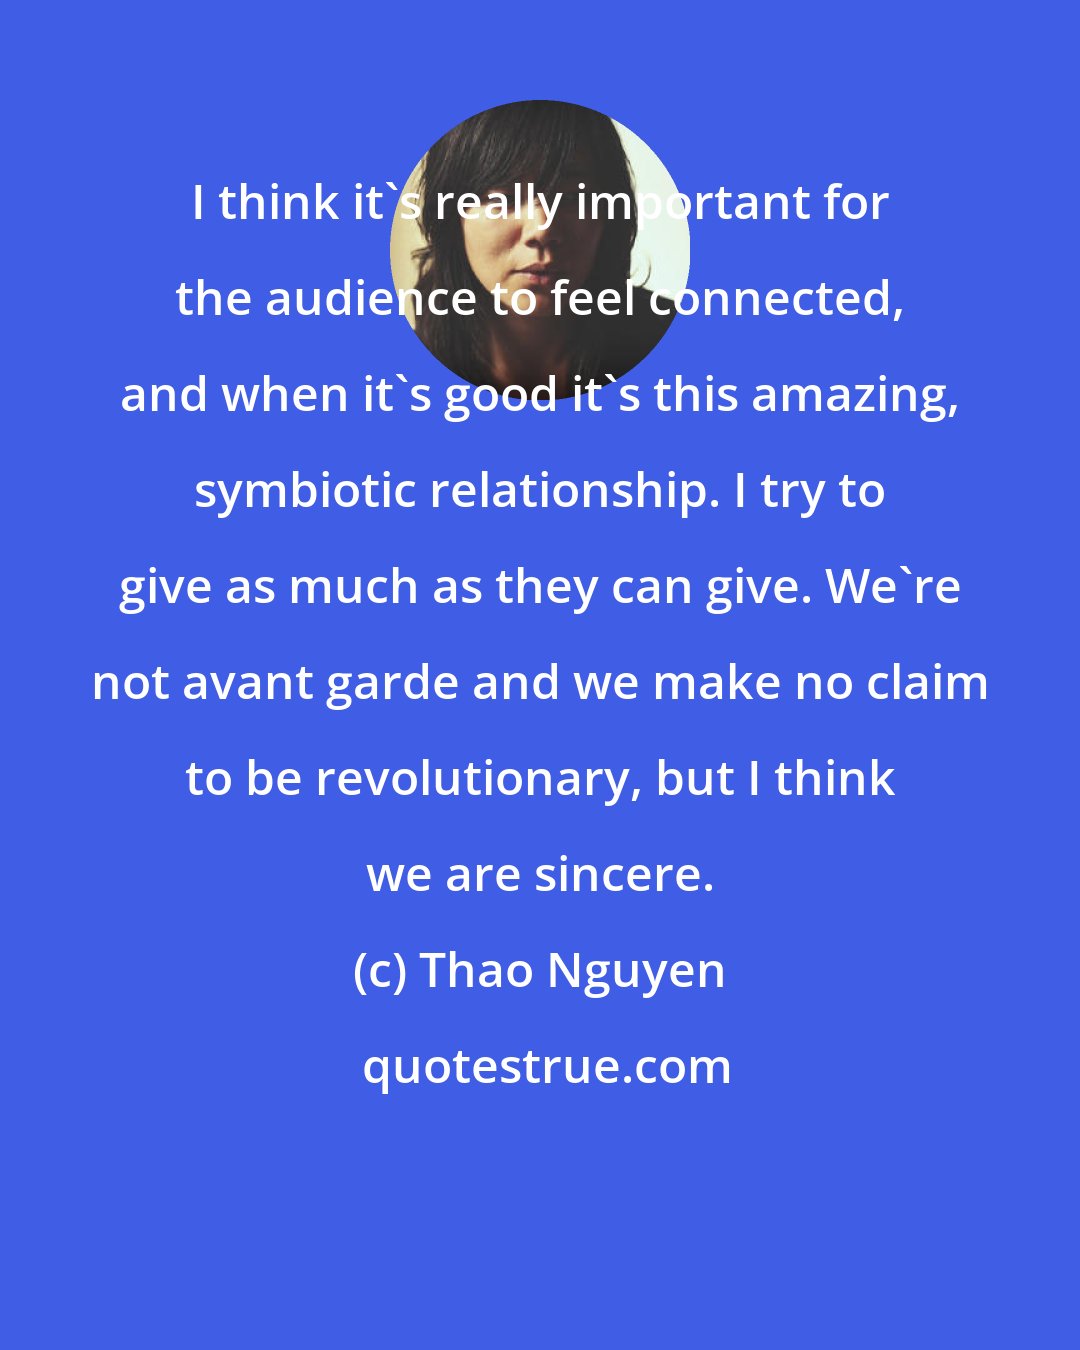 Thao Nguyen: I think it's really important for the audience to feel connected, and when it's good it's this amazing, symbiotic relationship. I try to give as much as they can give. We're not avant garde and we make no claim to be revolutionary, but I think we are sincere.